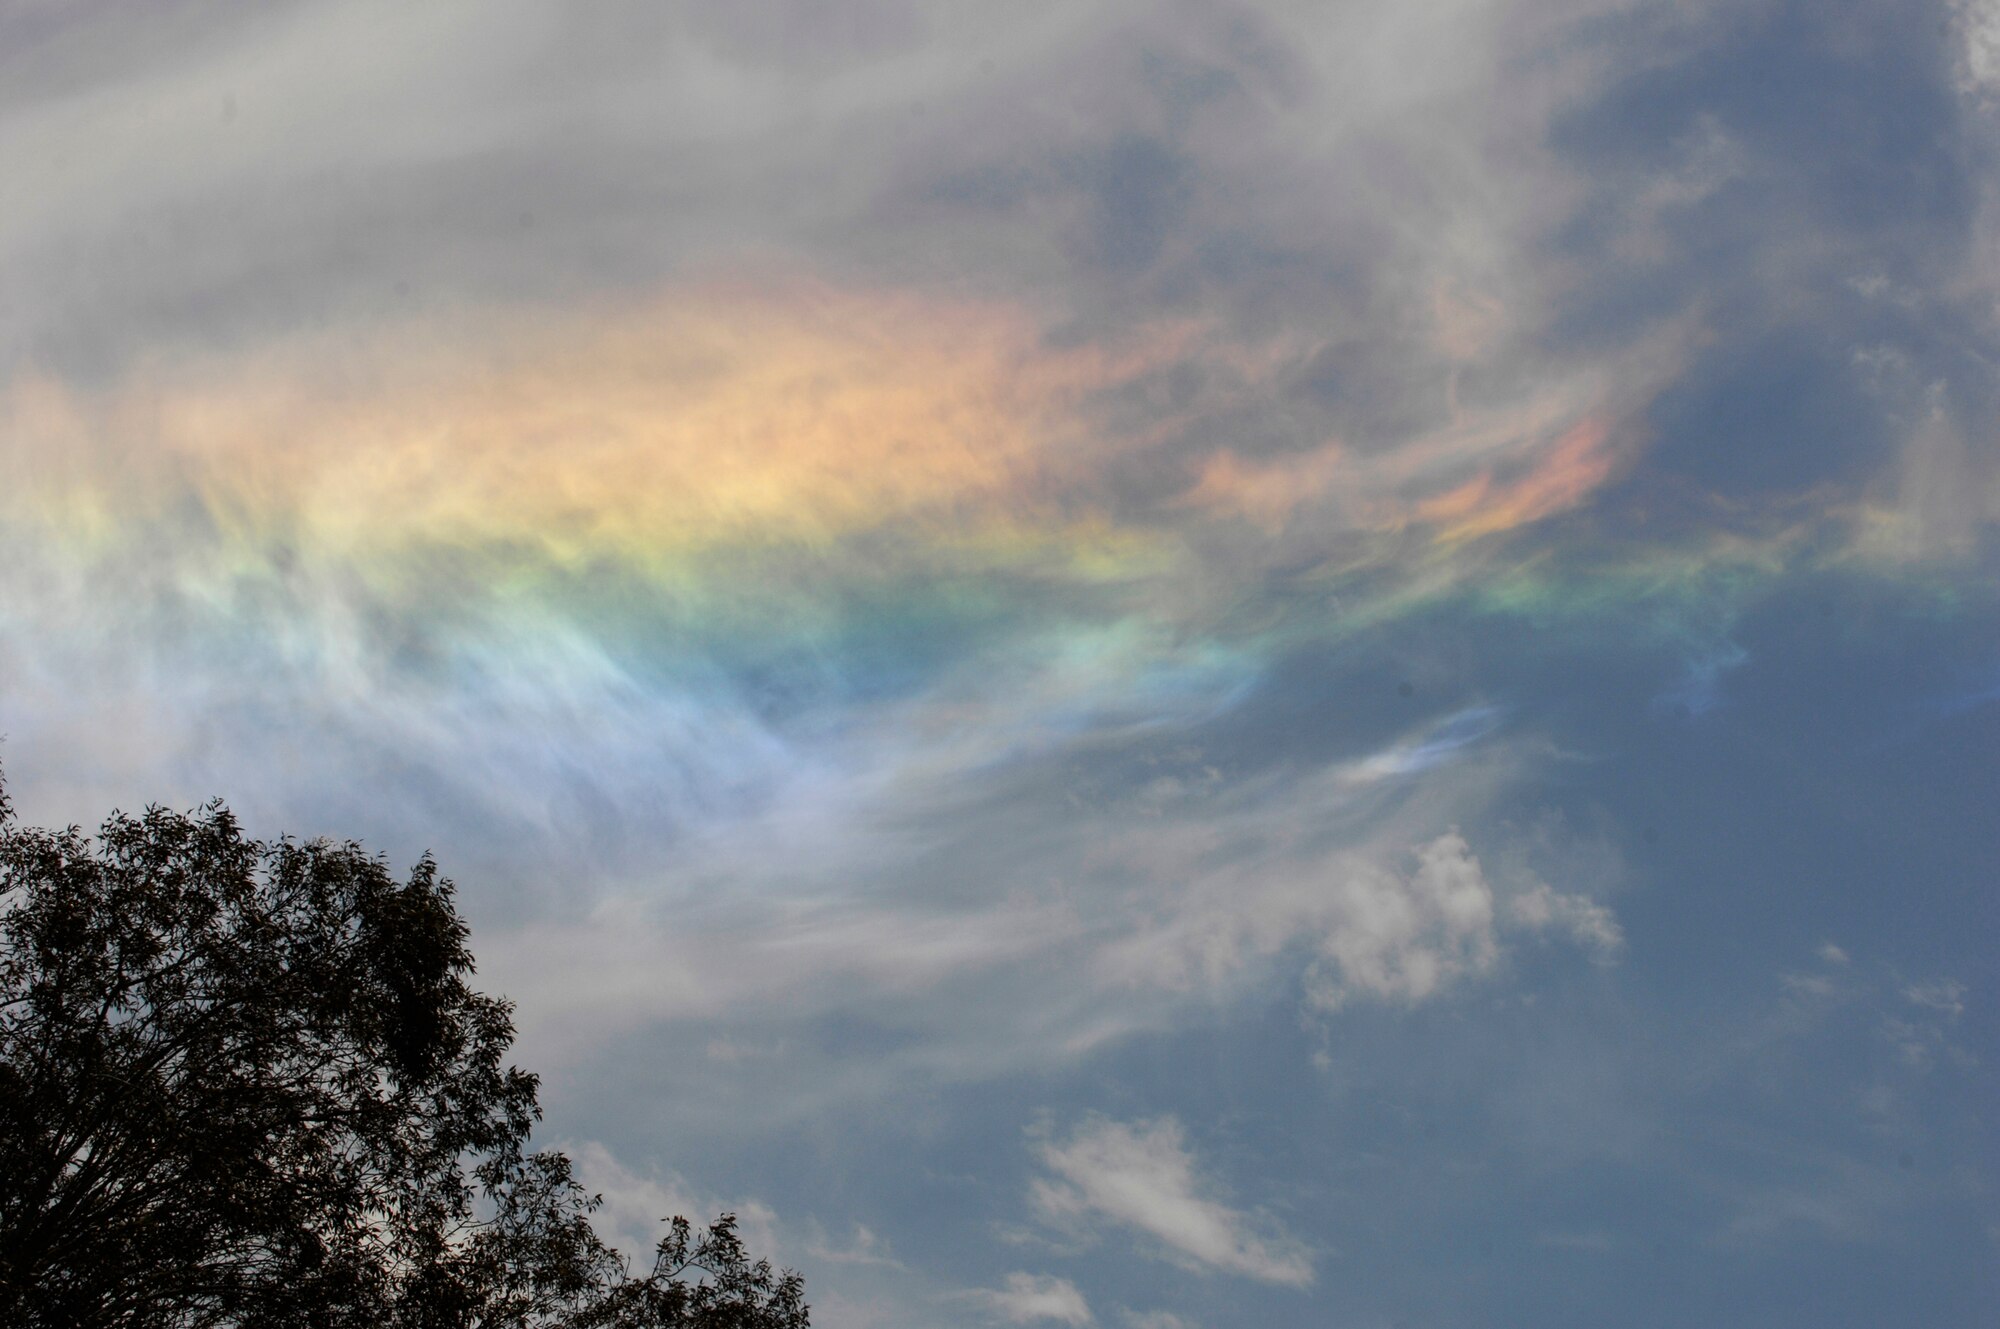 VANDENBERG AIR FORCE BASE, Calif. -- Team V received a glimpse of a rare optical phenomenon here May 18. The circumhorizontal arc, more popularly known as a "fire rainbow," appeared in the skies above Vandenberg approximately 11 a.m. to 1 p.m. The arc is formed when sunlight rays interact with the ice crystals of cirrus clouds, producing well-separated rainbow-like colors. If the crystal alignment is just right, this interaction makes the entire cirrus cloud appear to shine like a fiery rainbow. (U.S. Air Force photo/Senior Airman Matthew Plew)